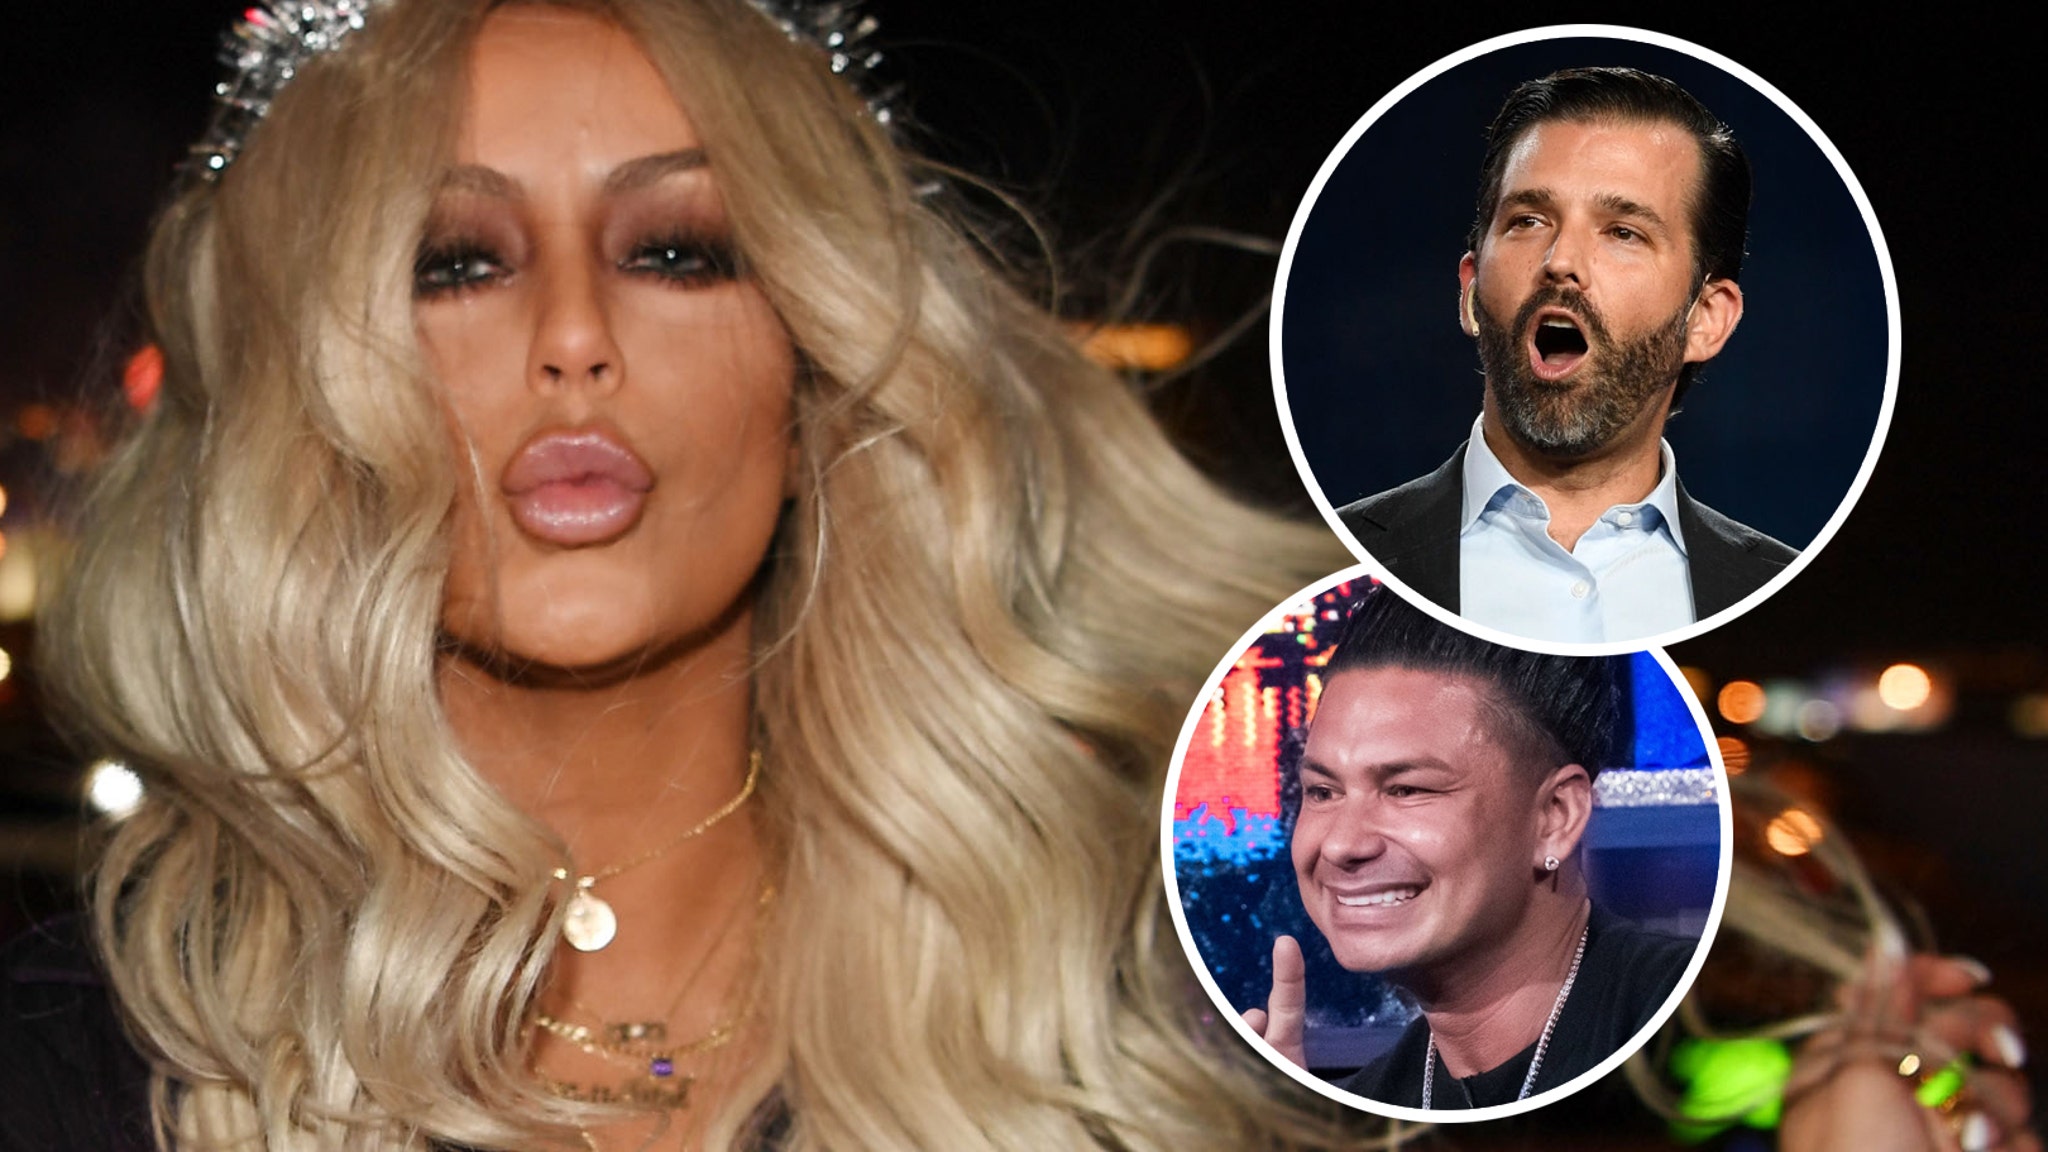 Aubrey O'Day Says Donald Trump Jr.' Knows He's Her 'Soulmate'